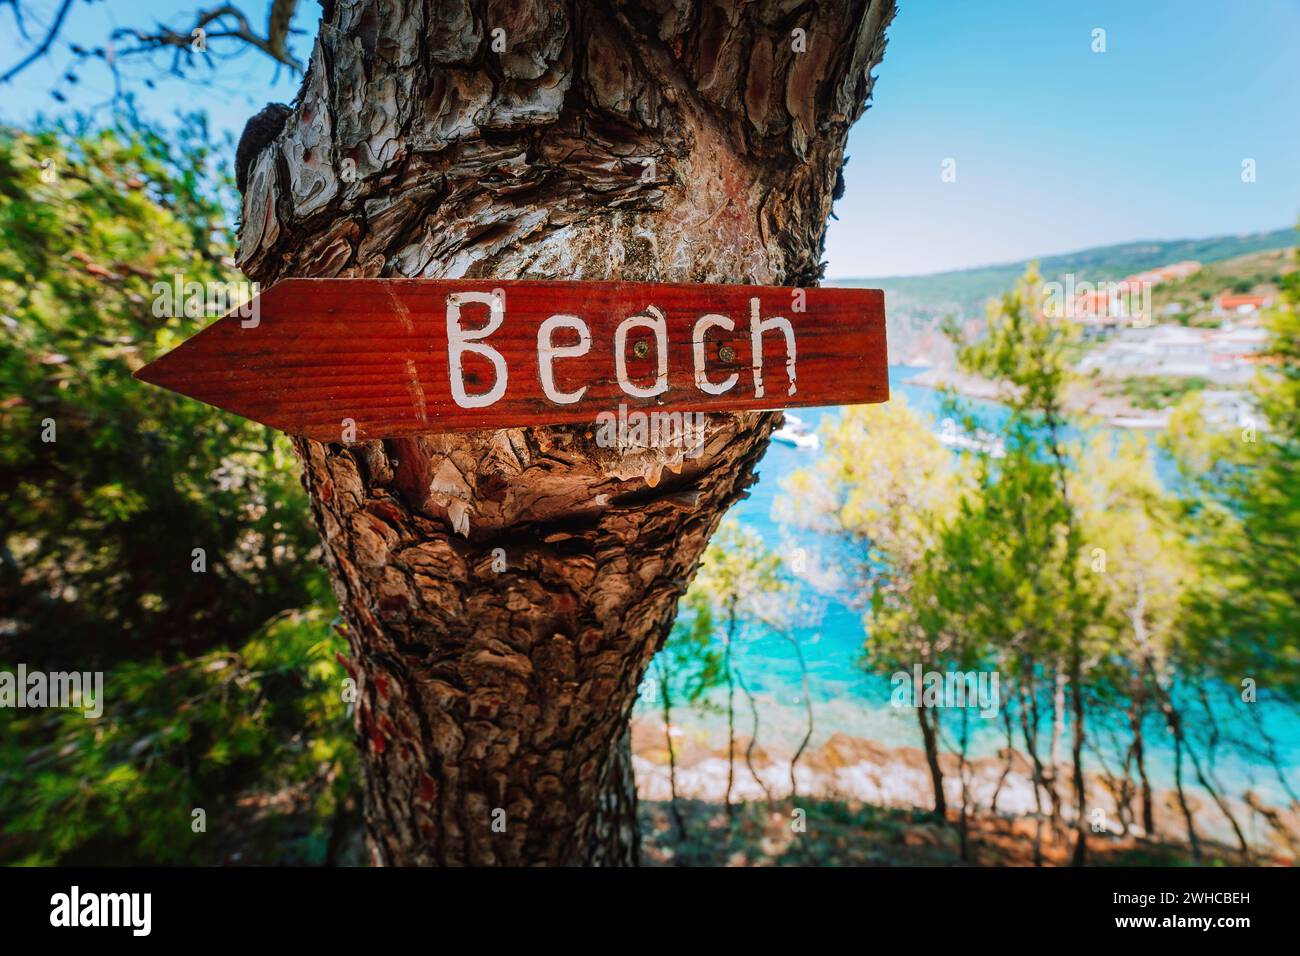 Assos village in morning light, Kefalonia. Greece. Beach wooden arrow sign on a pine tree showing direction to small hidden beach. Stock Photo